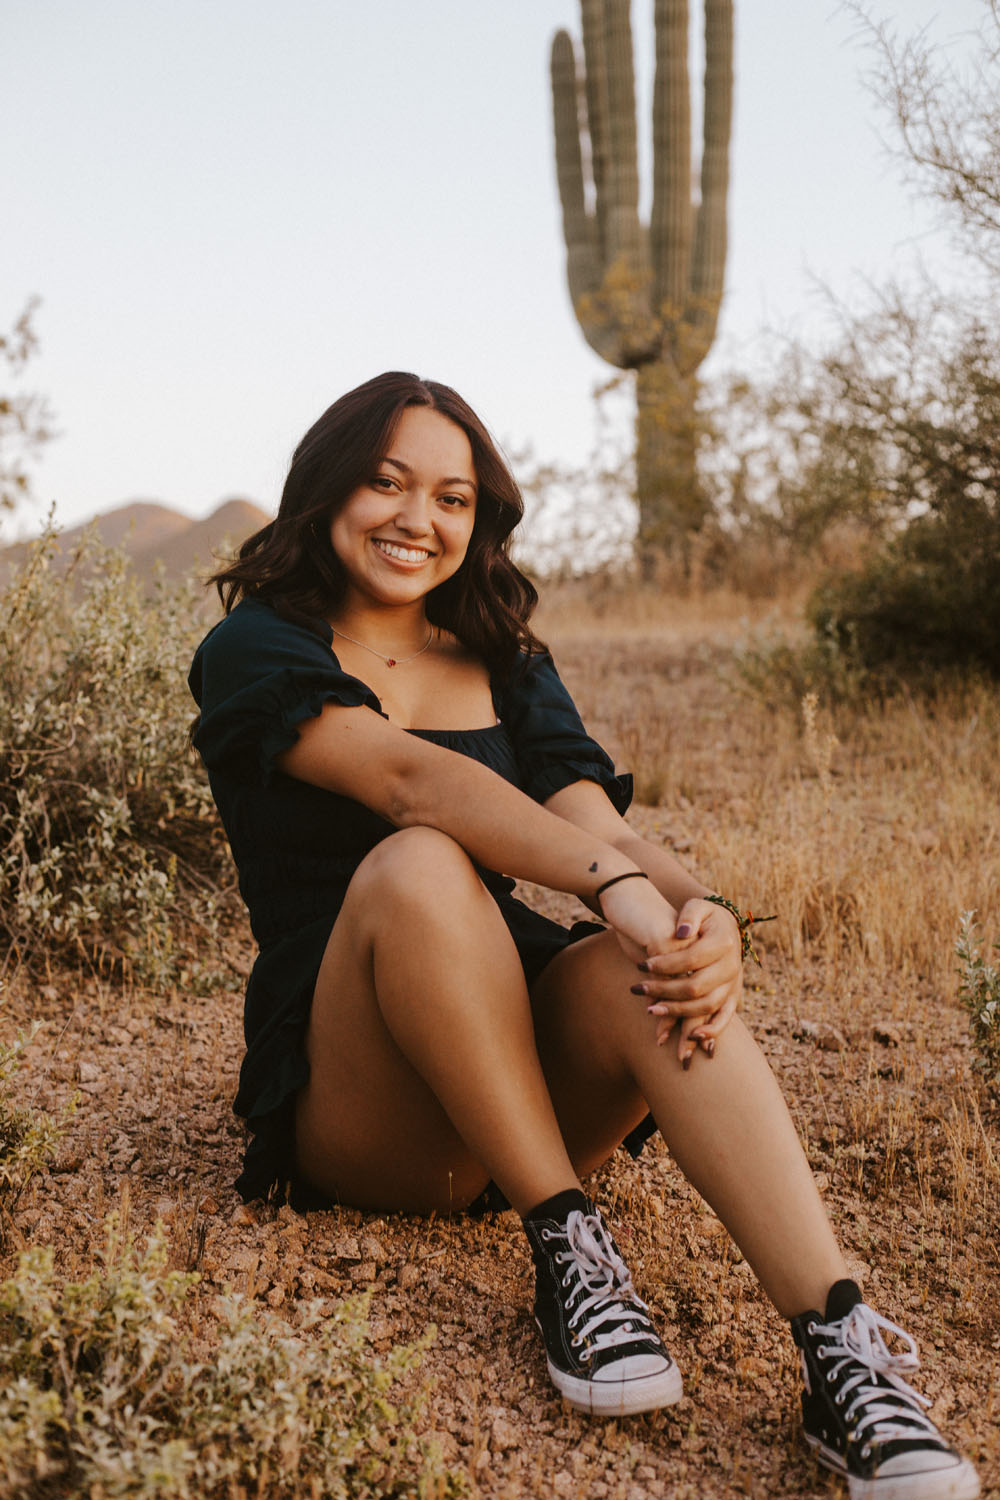 Malaya smiling in front of the camera in a desert landscape